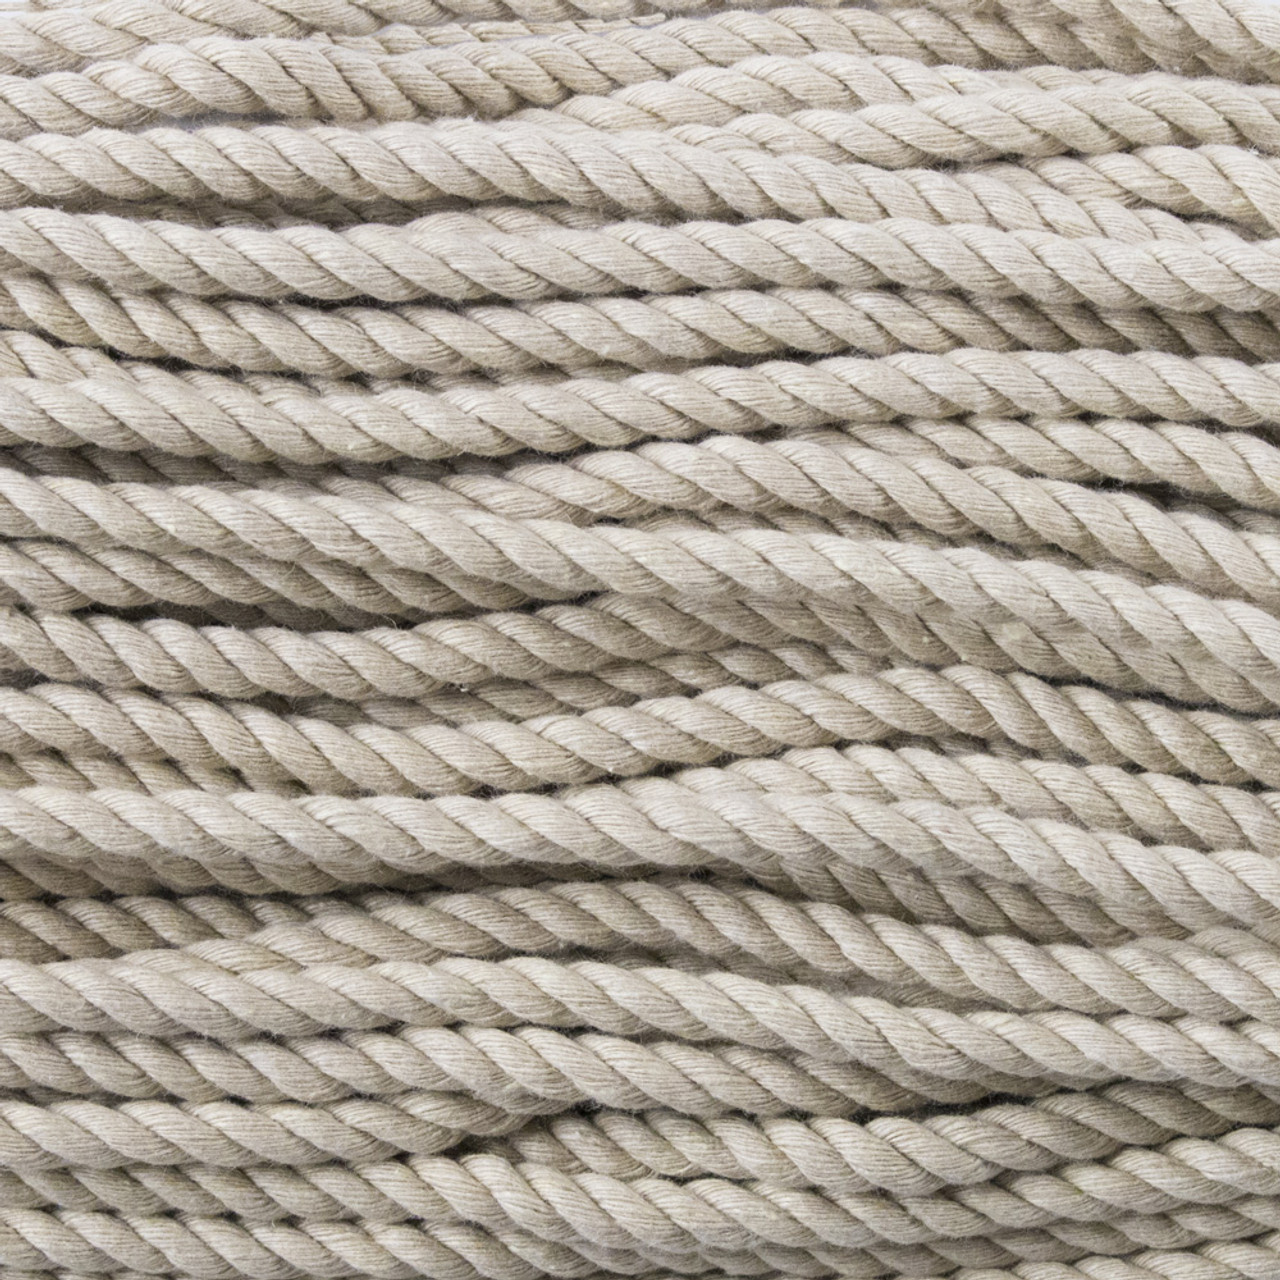 1/4 Inch Twisted Cotton Rope - Gold